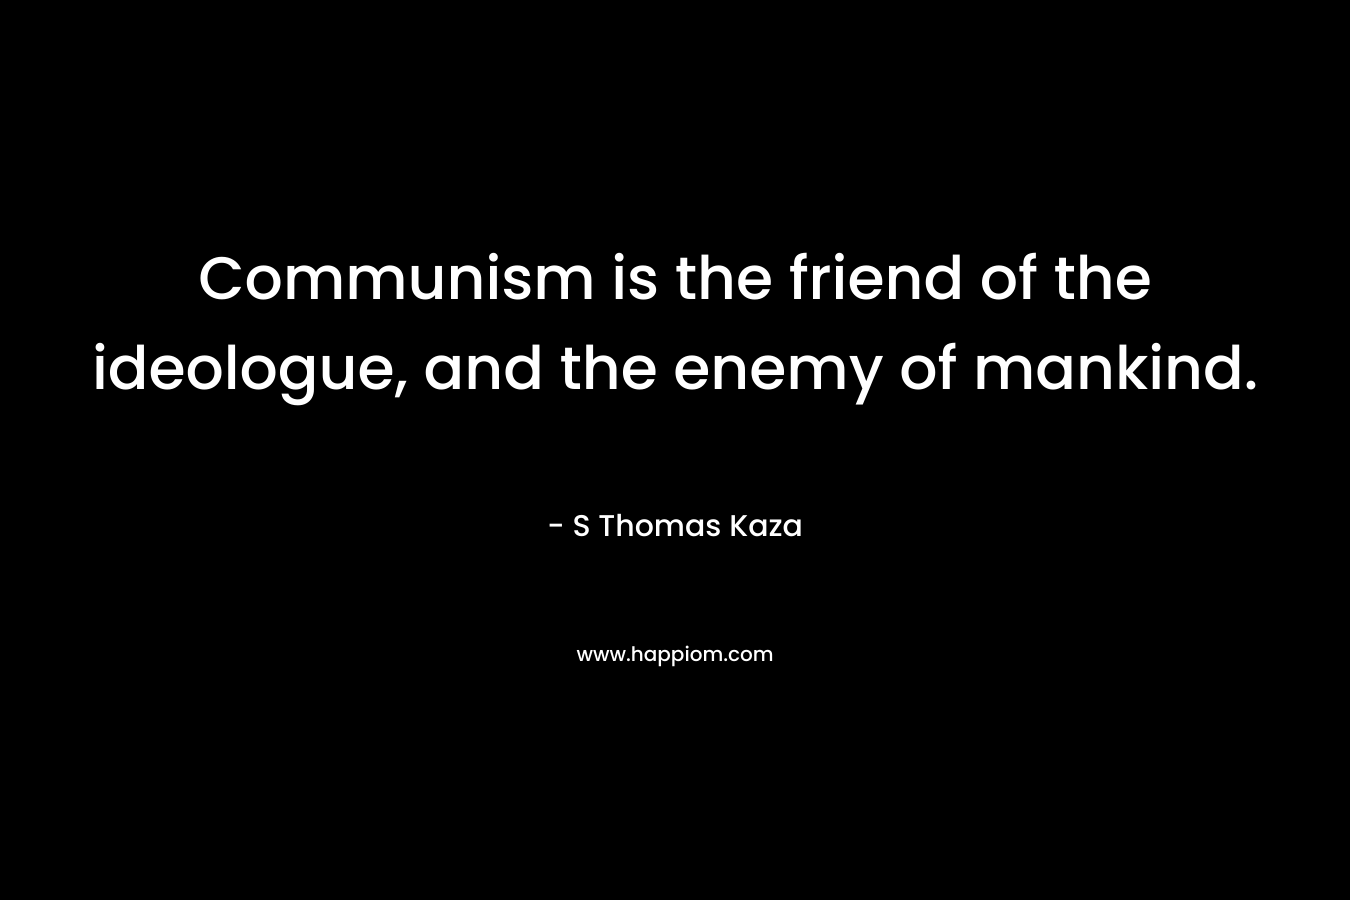 Communism is the friend of the ideologue, and the enemy of mankind.